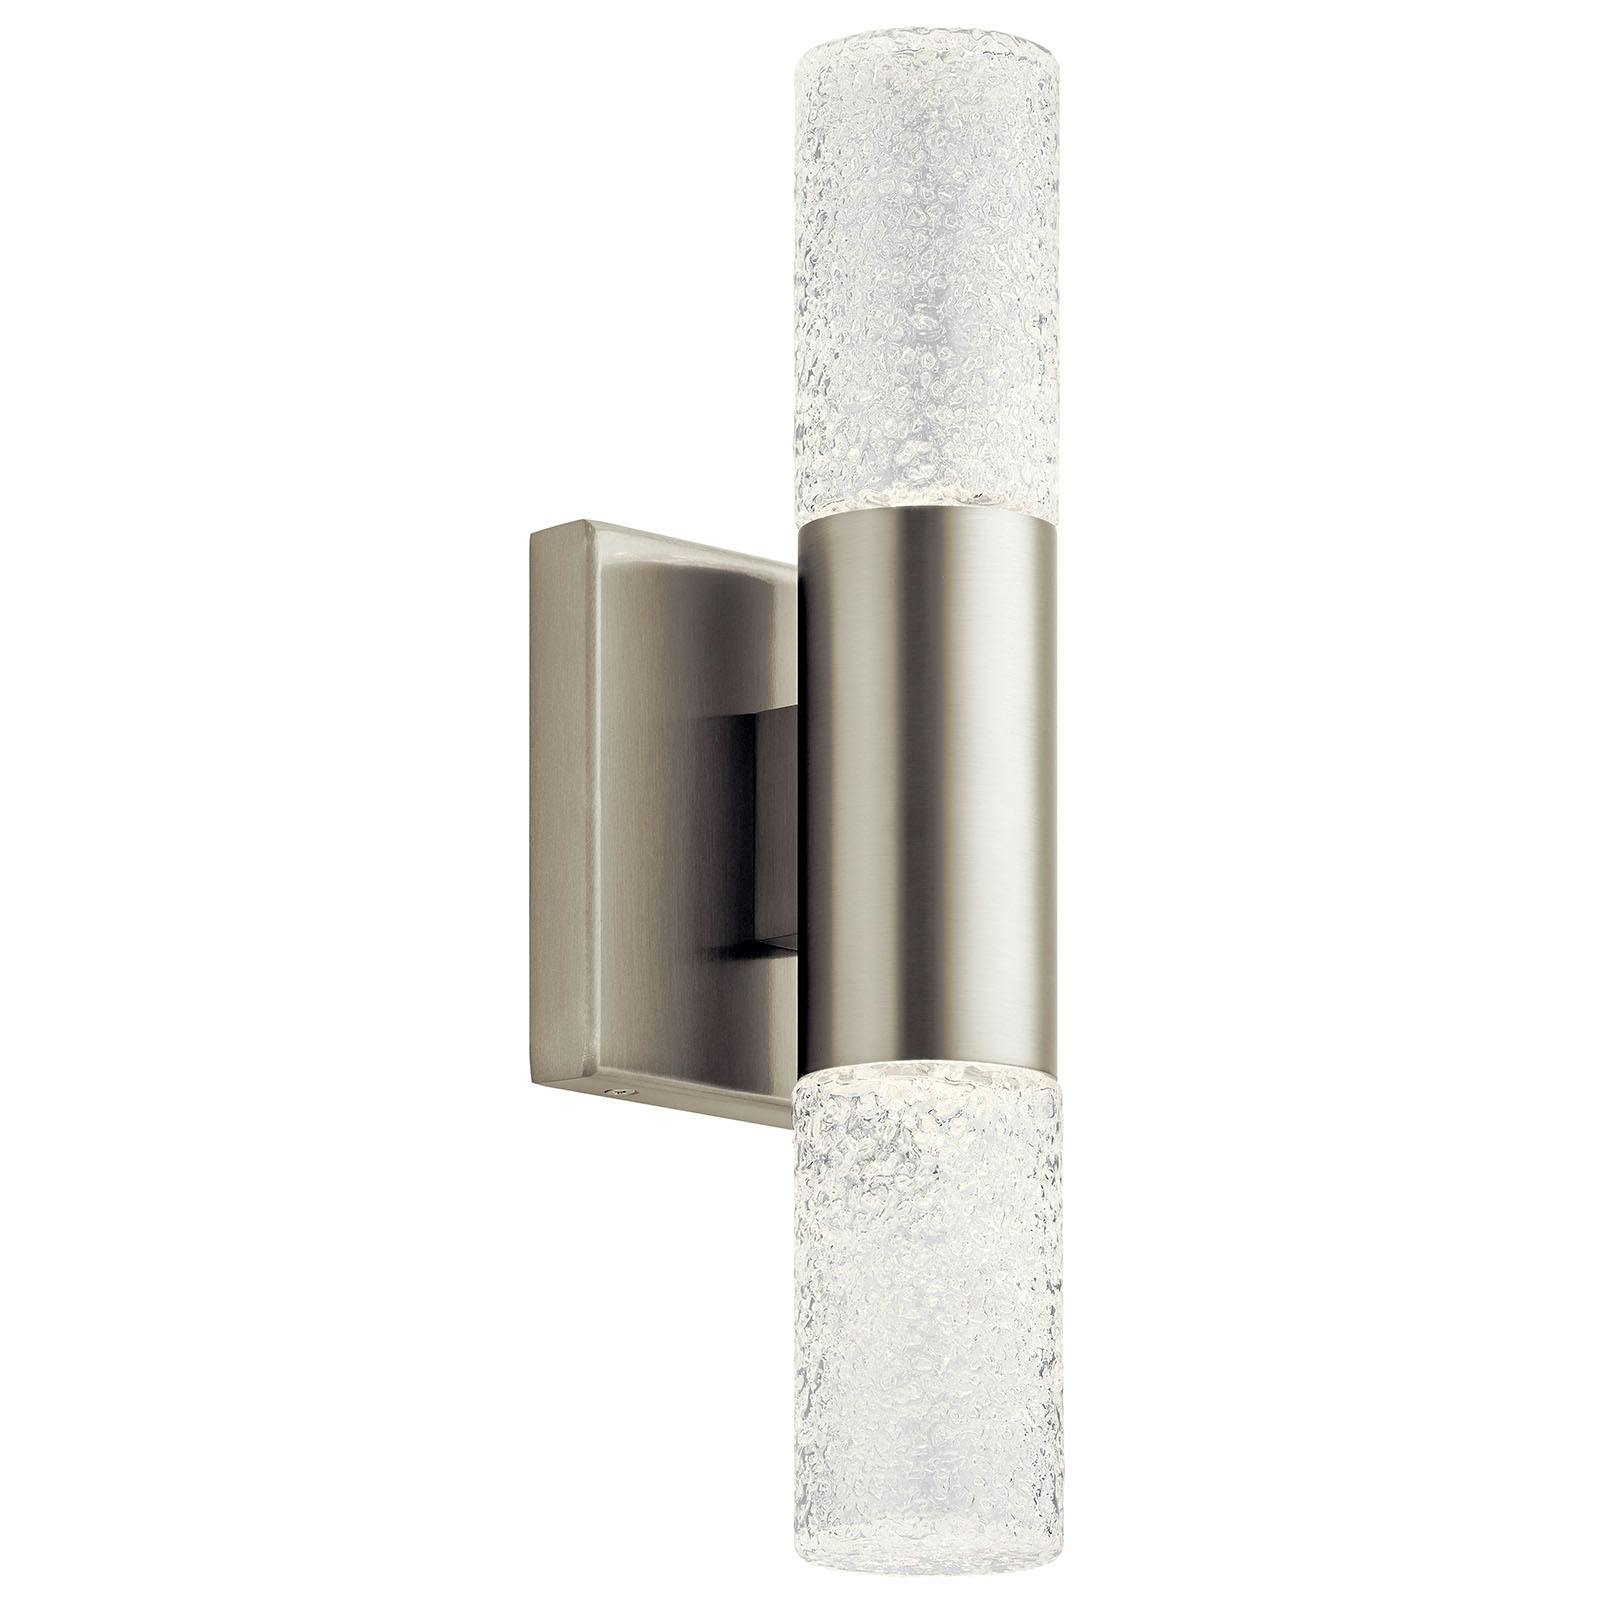 Glacial Glow LED Sconce Brushed Nickel hung vertically on a white background